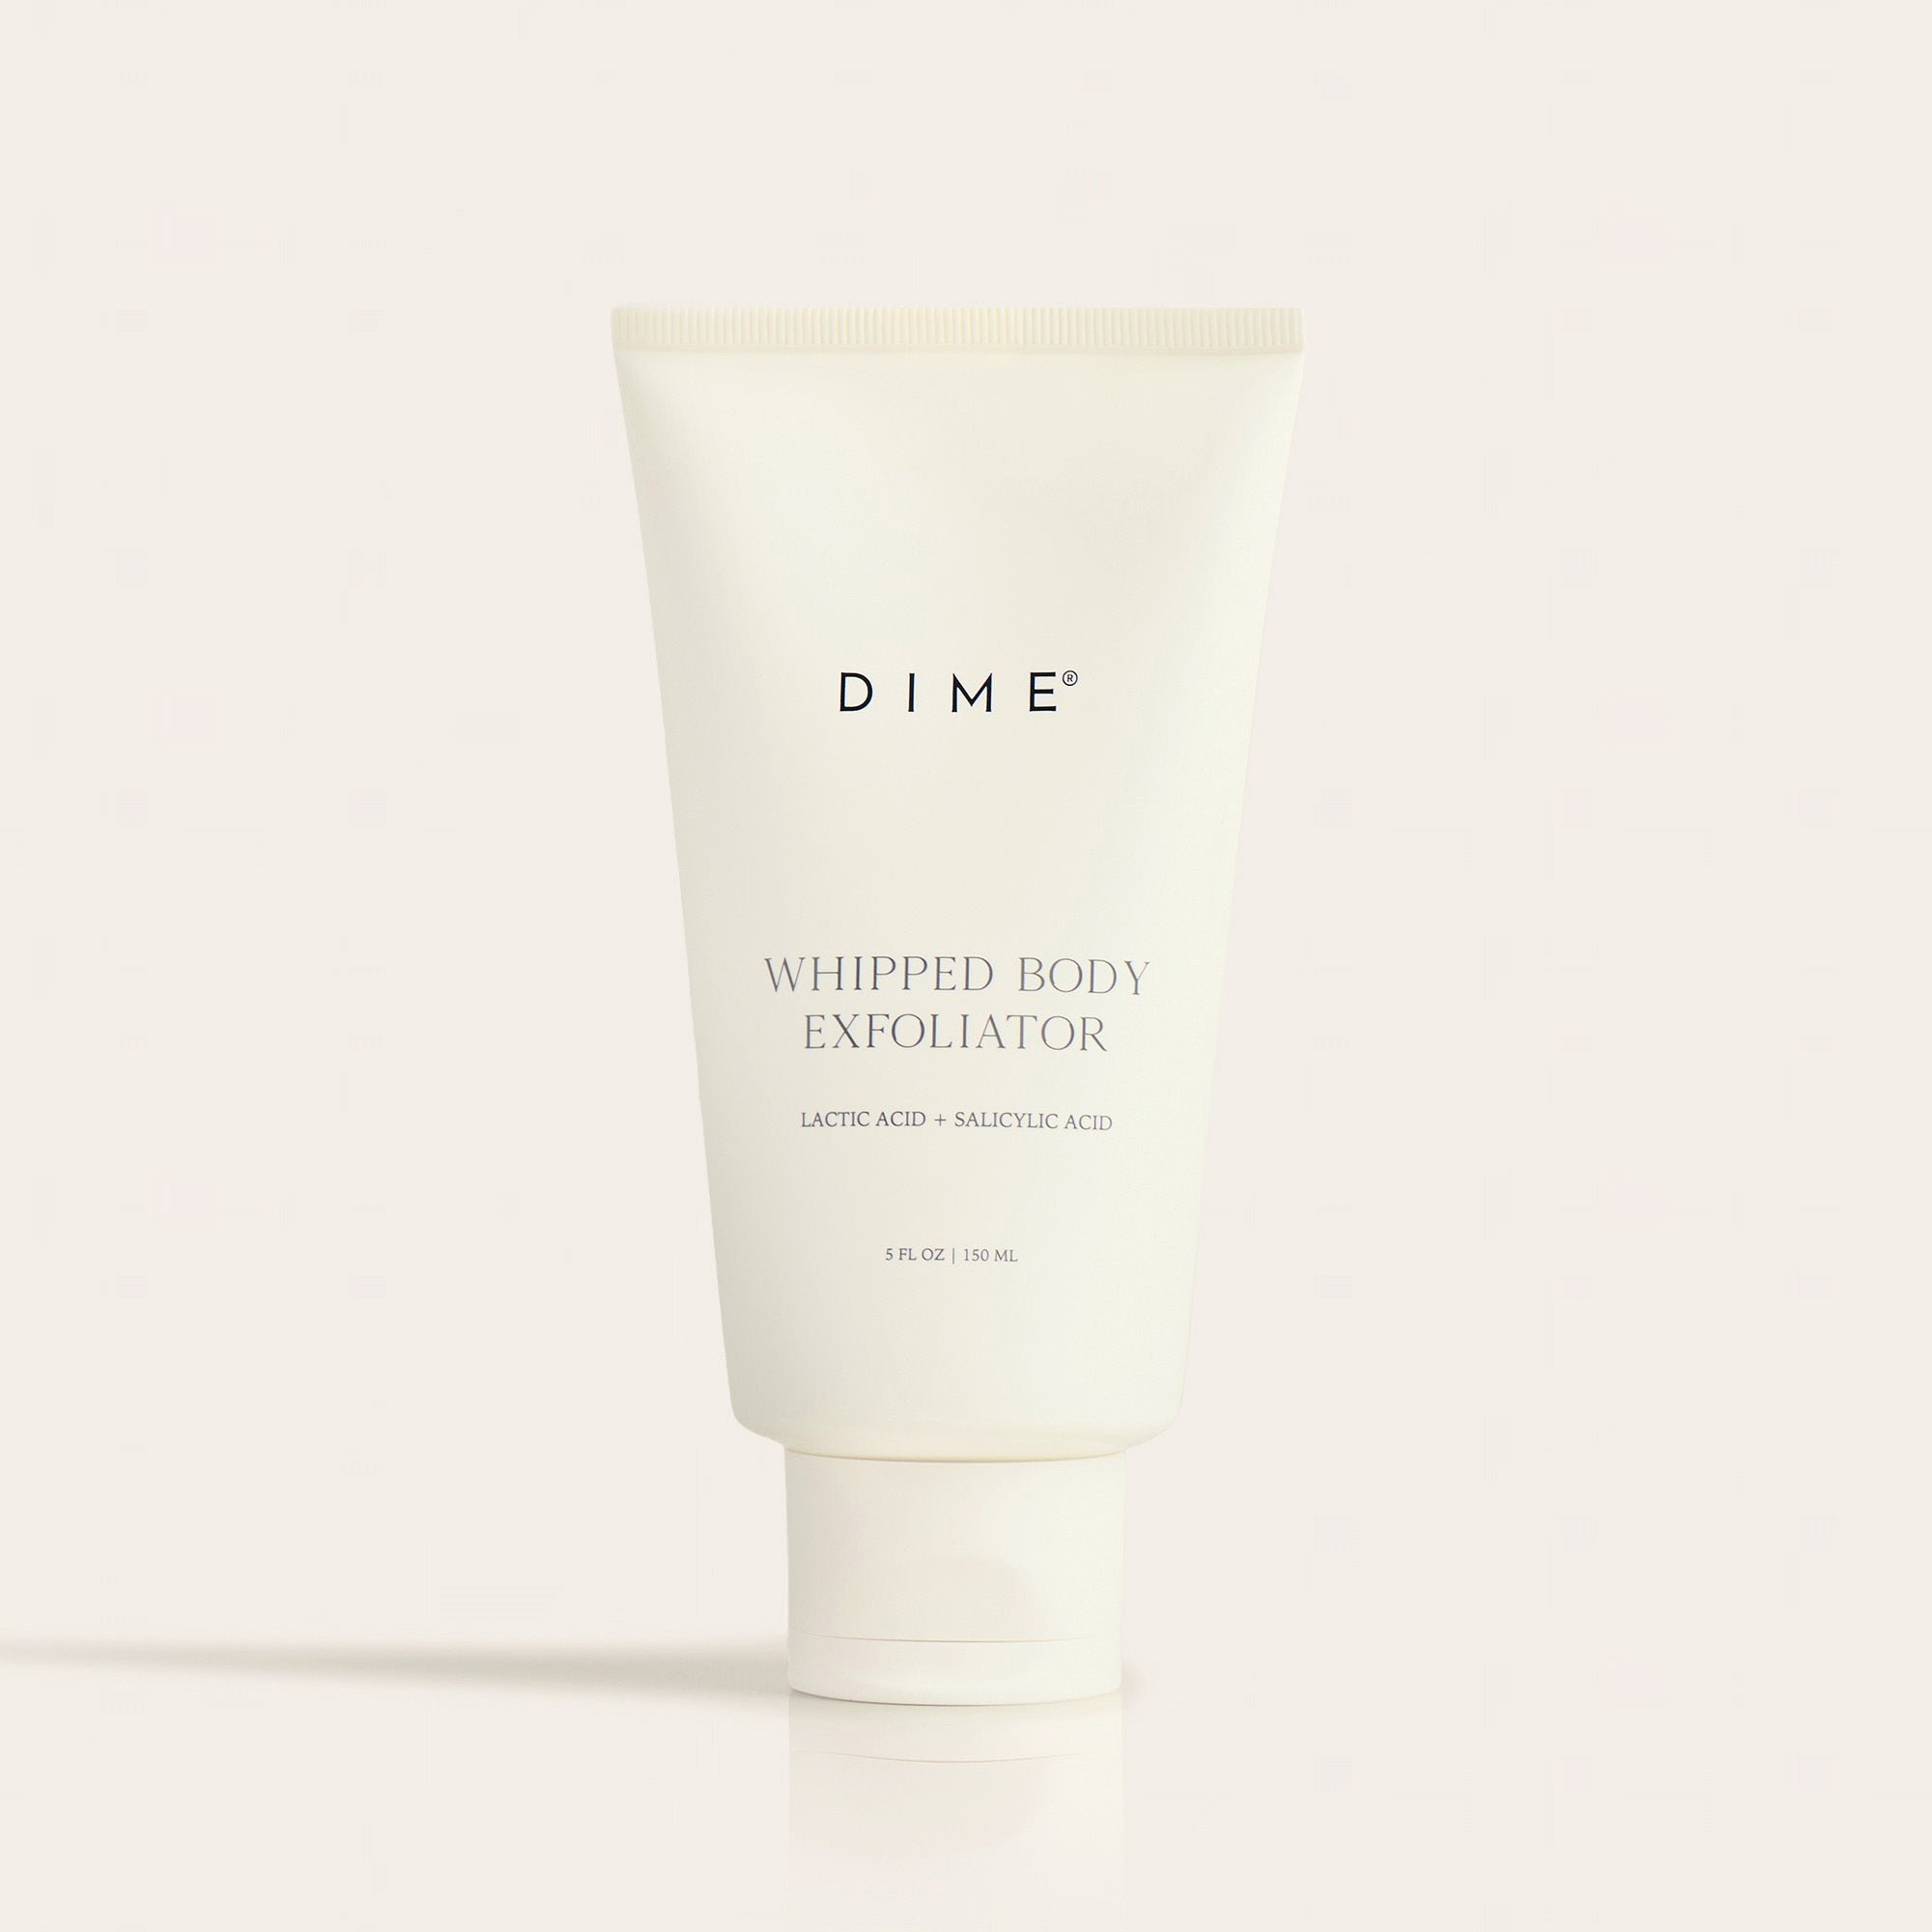 whipped body exfoliator product